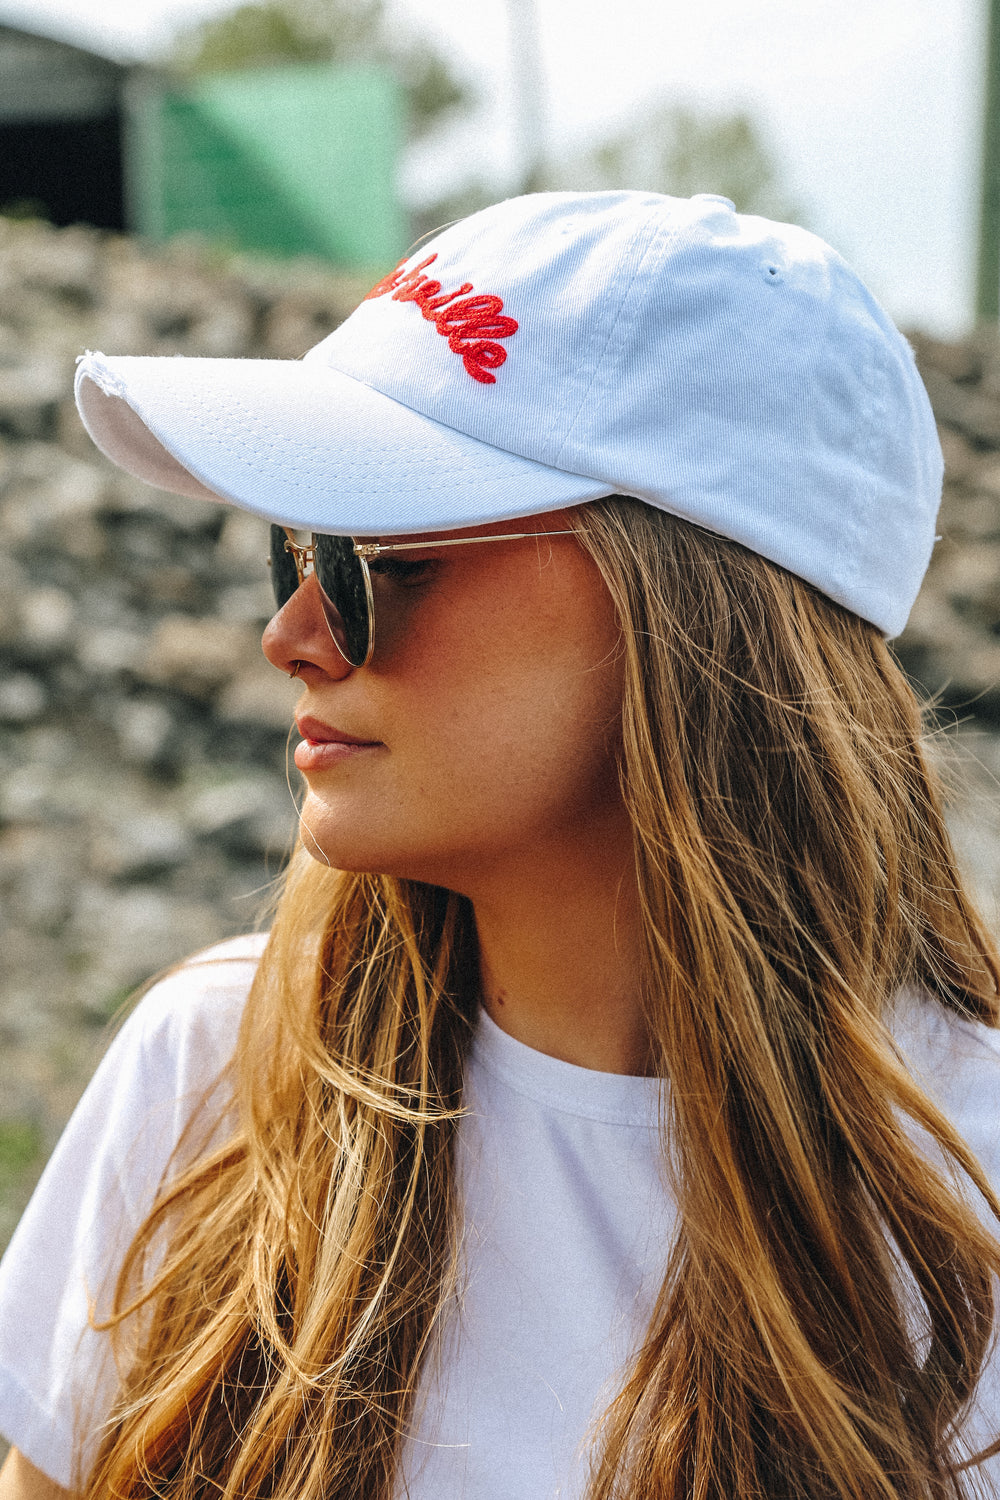 Nashville Distressed Ball Cap [Off-White/Red]